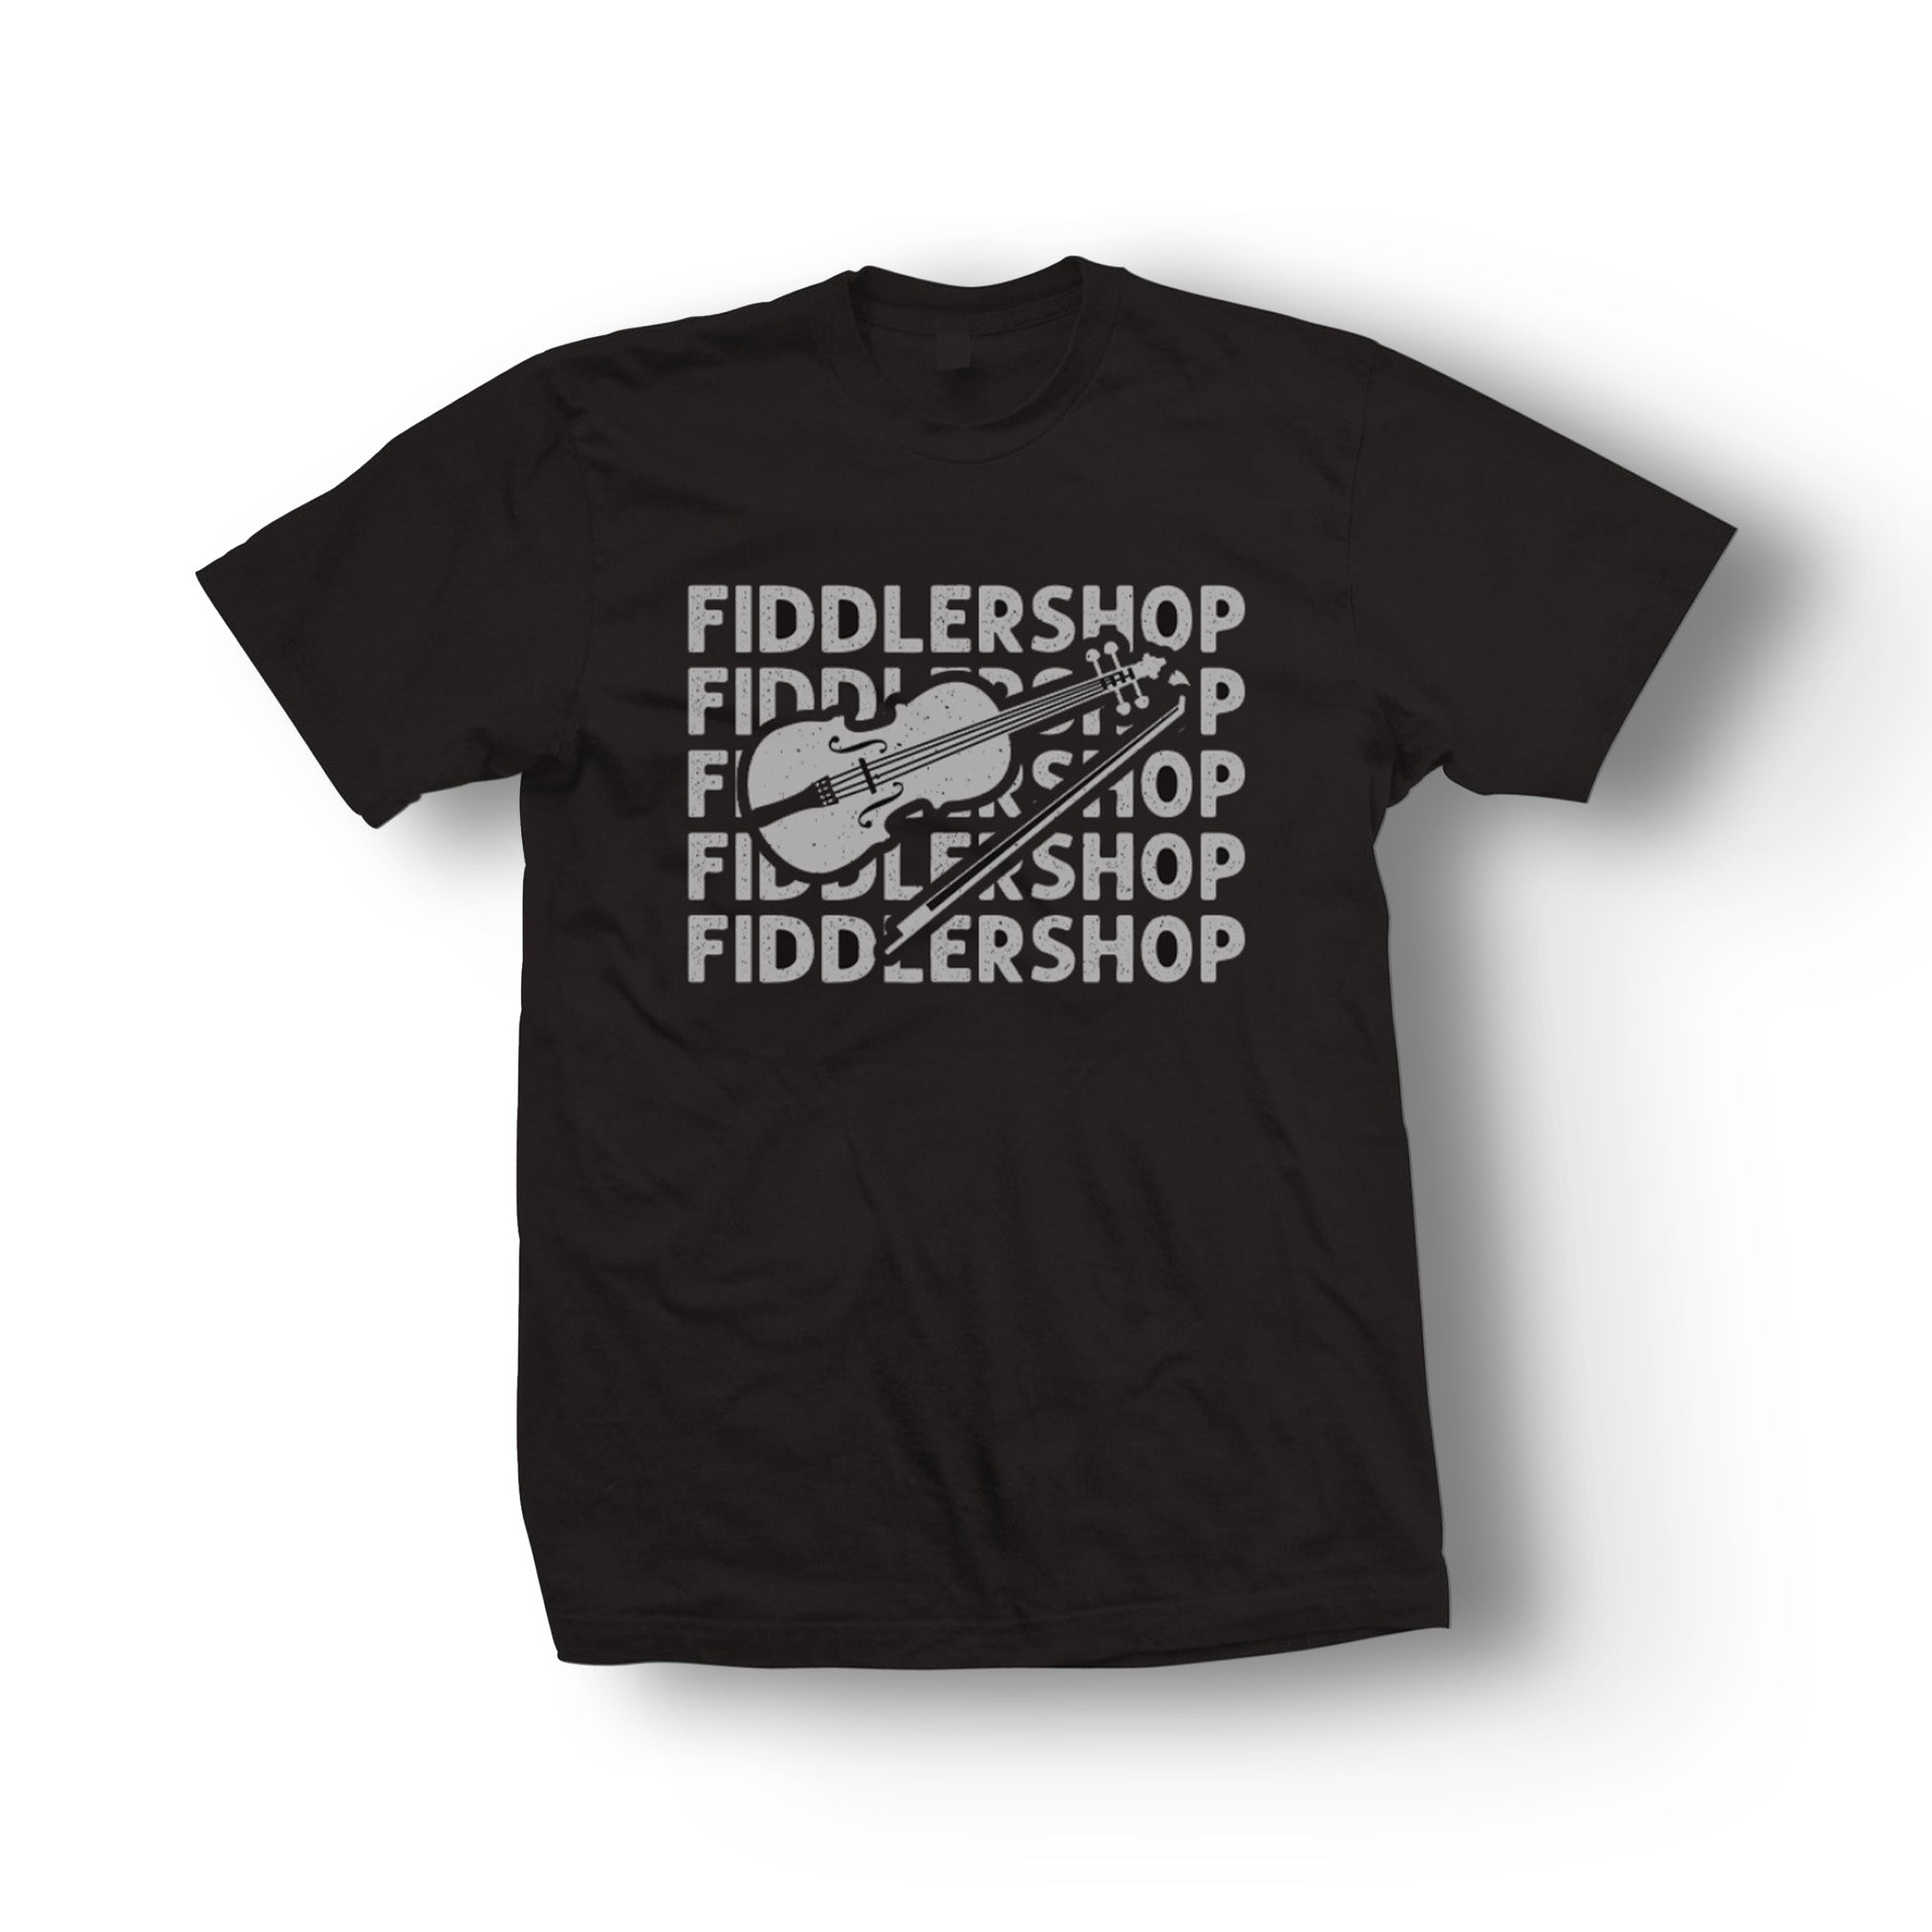 Fiddlershop Funky Tee. 5 repetitive prints of Fiddlershop, with a violin centerpiece. Black t-shirt with white print.